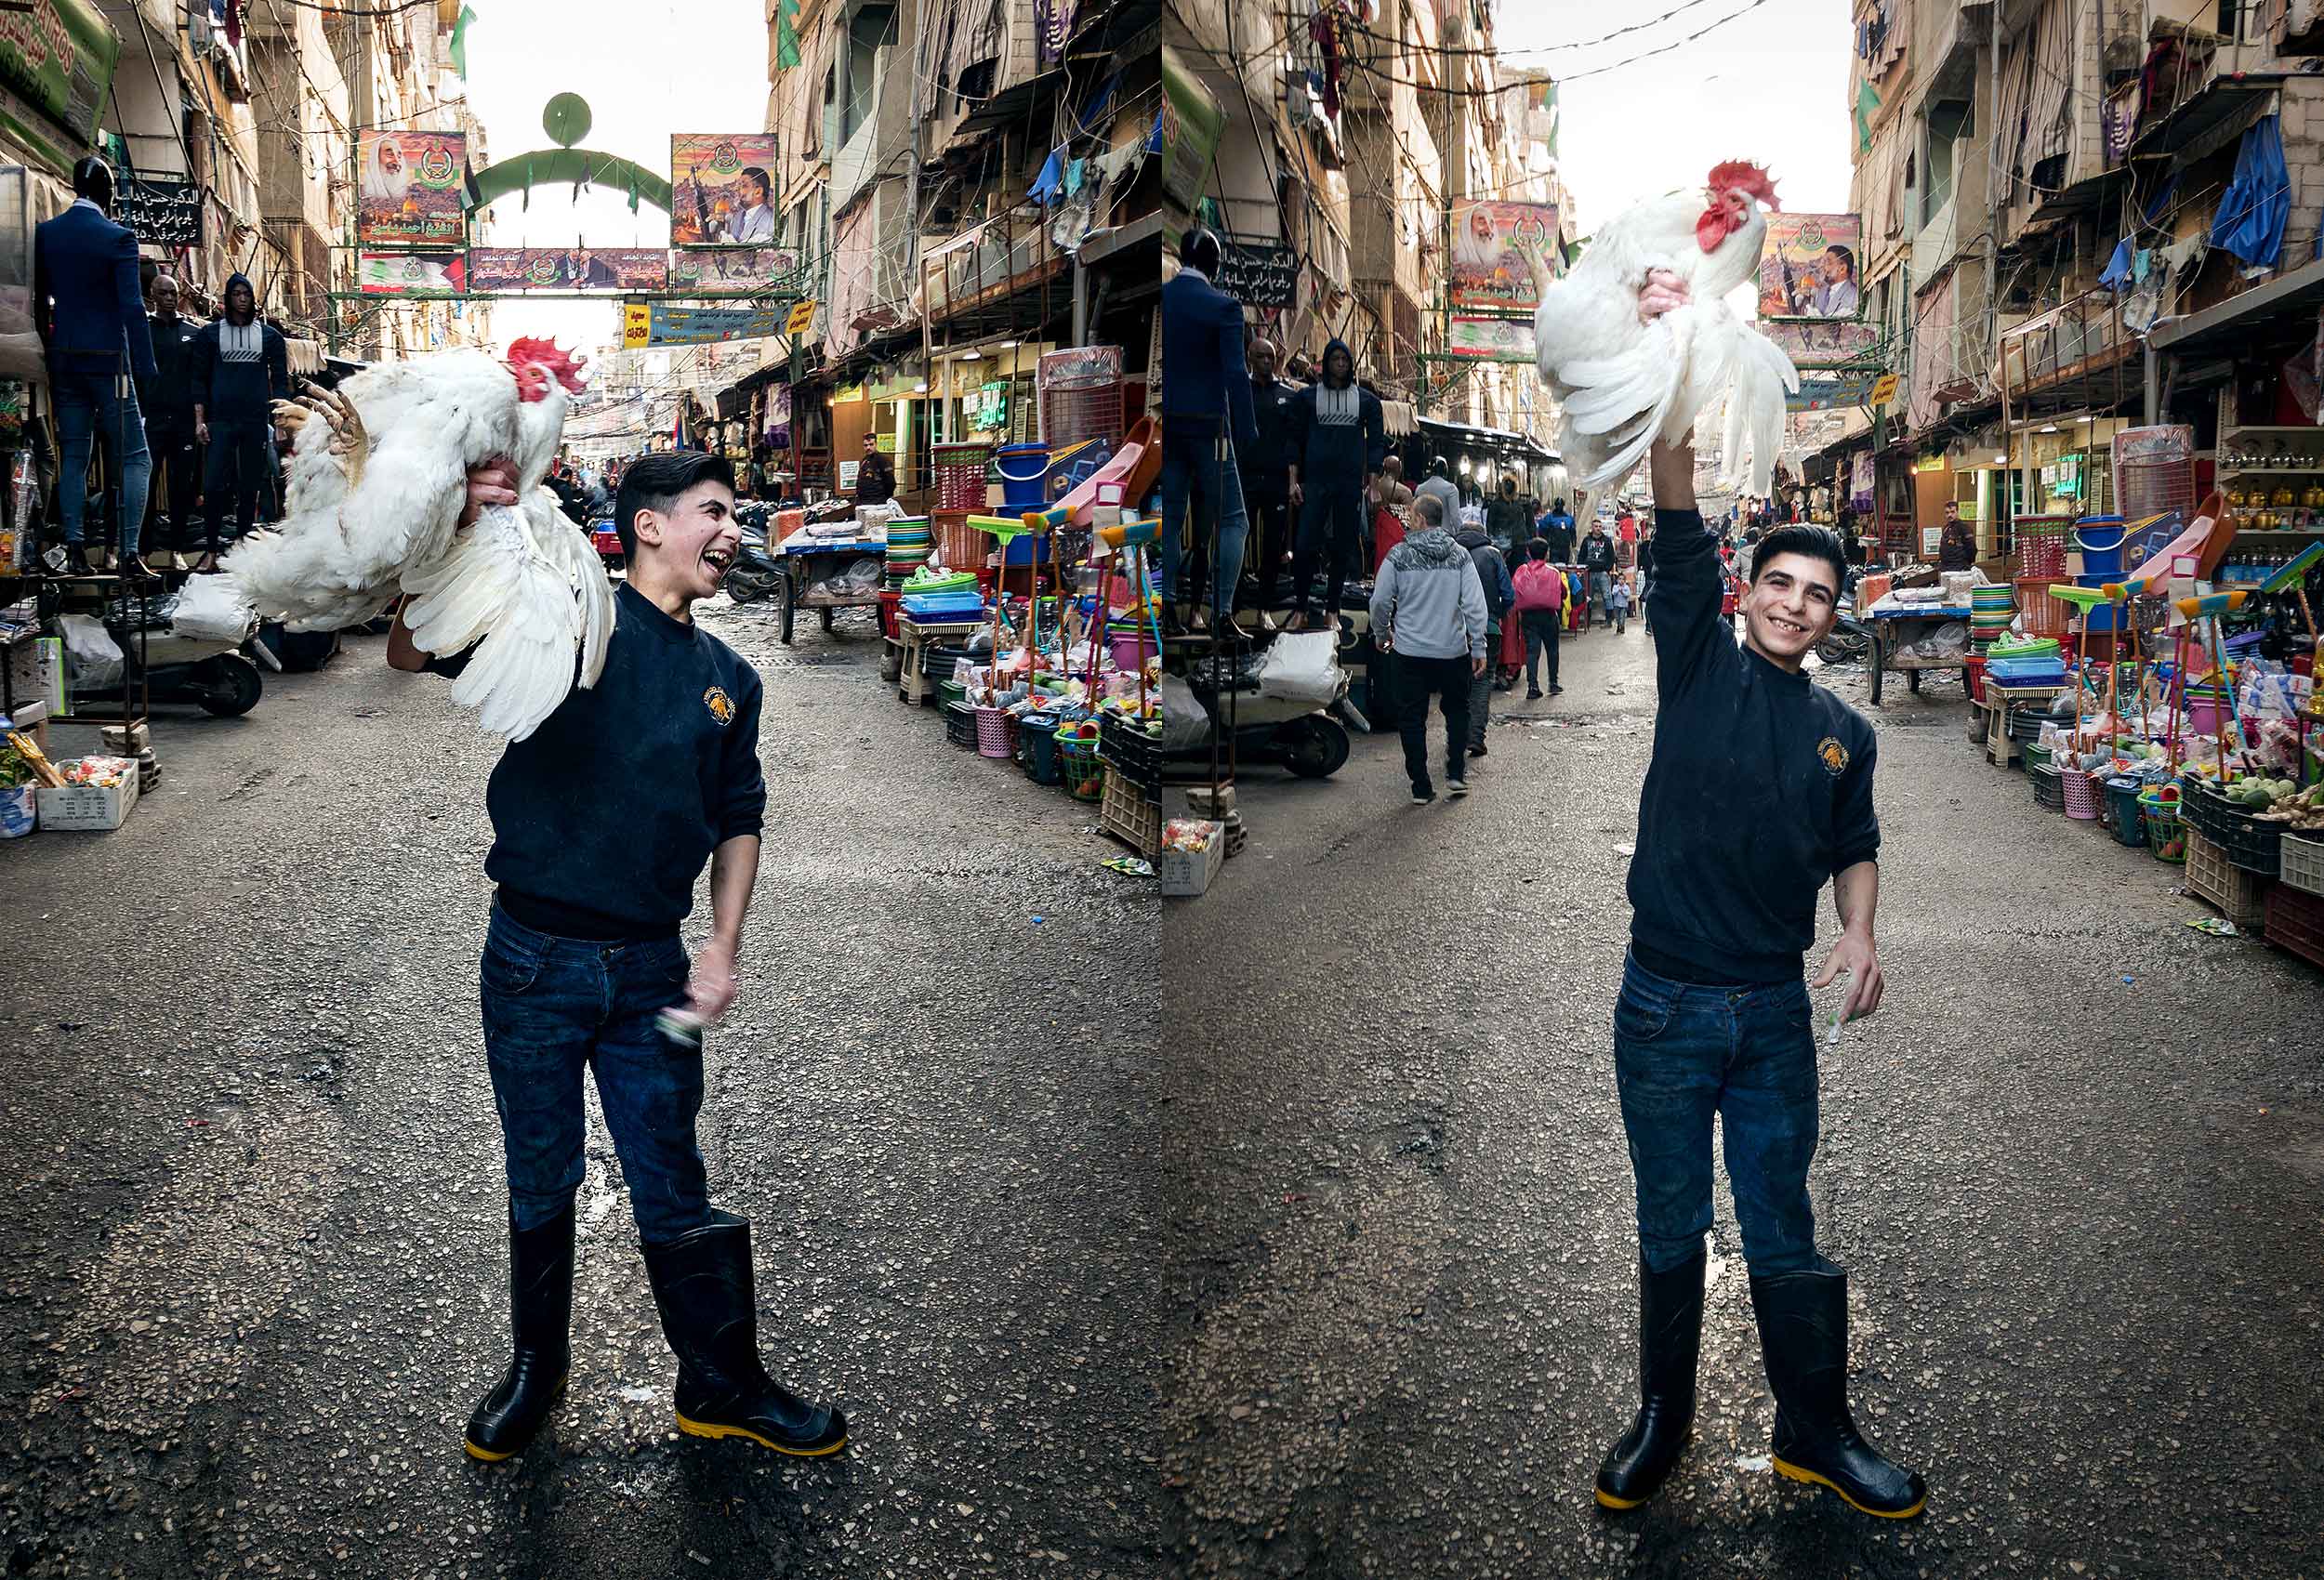  a boy holds a live chicken in the air in an open market in beirut 